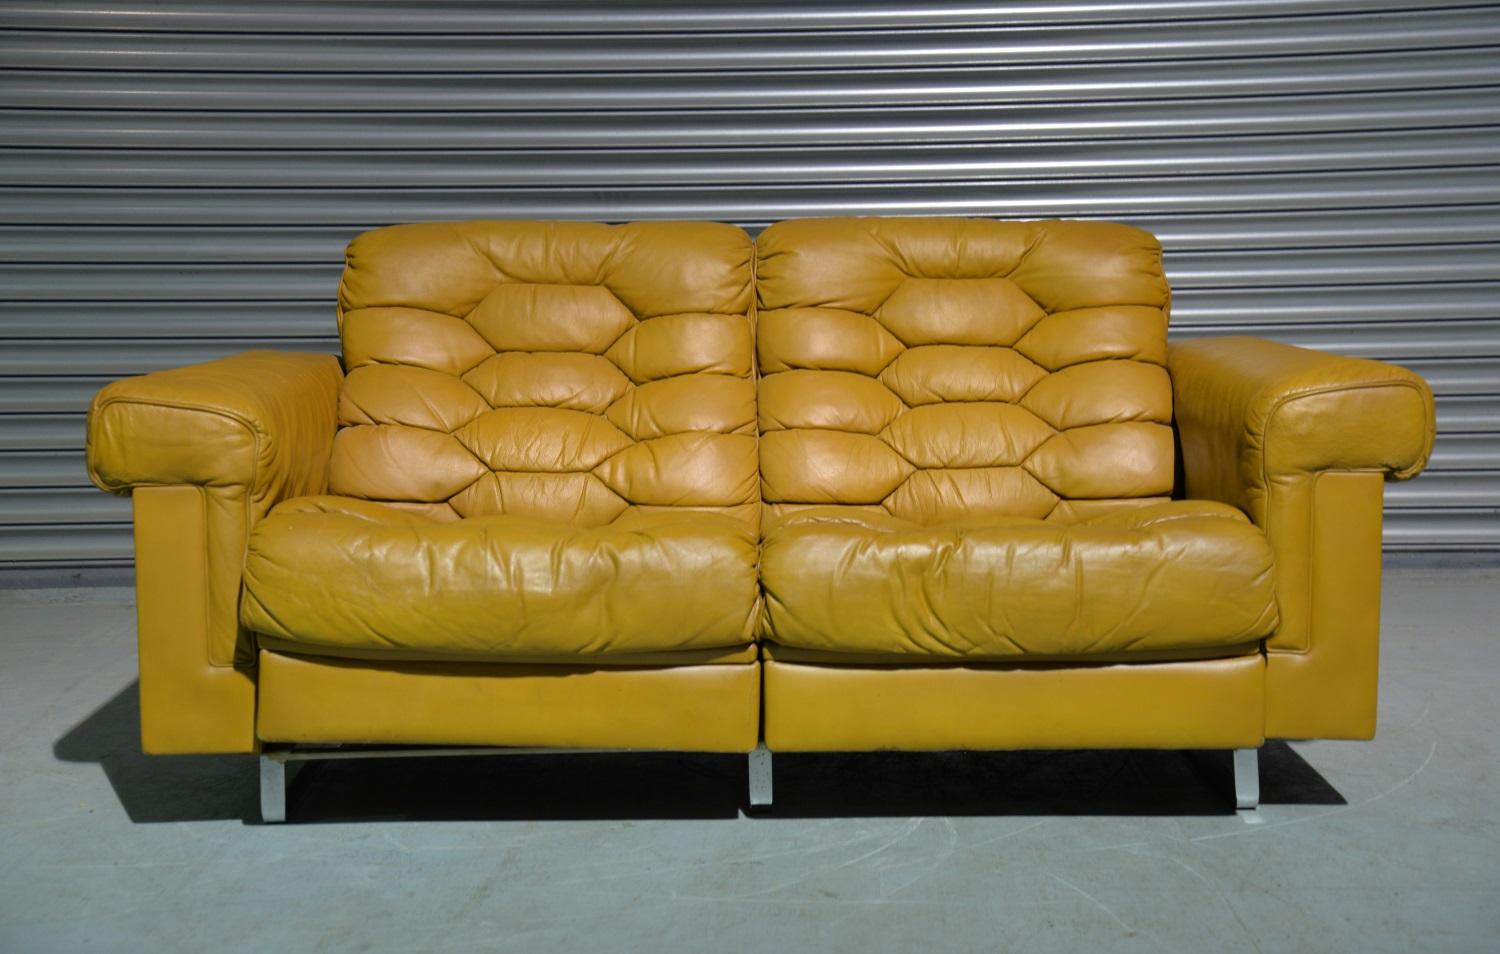 Discounted airfreight for our US and International customers (from 2 weeks door to door) 

We are delighted to bring to you a beautiful two seater reclining sofa from De Sede of Switzerland. Designed by Robert Haussmann with a honeycomb structure,